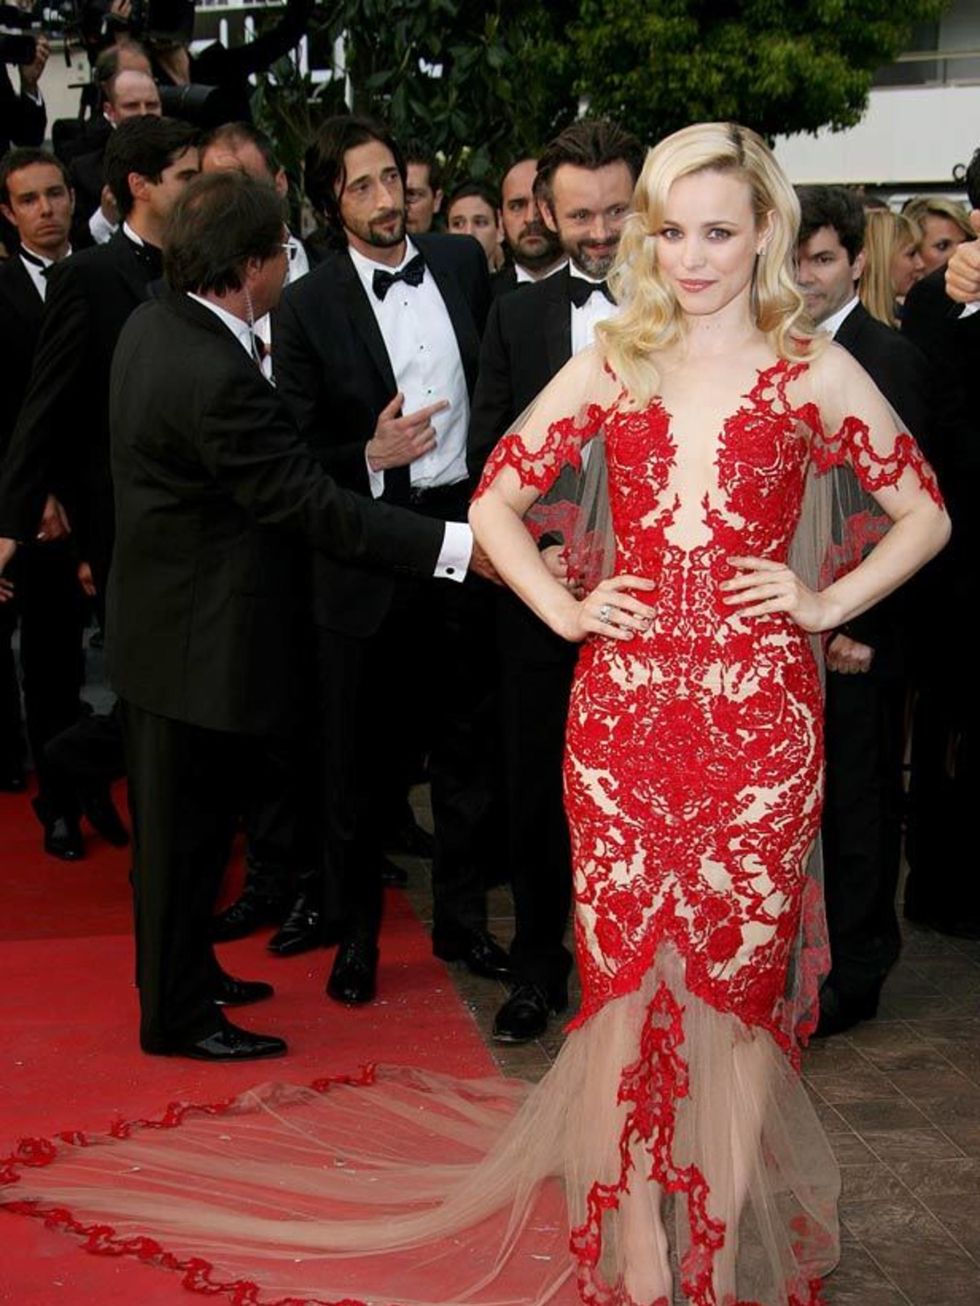 <p>Rachel McAdams made an impact wearing a long trail red dress by <a href="http://www.elleuk.com/catwalk/collections/marchesa/autumn-winter-2011">Marchesa</a> for the 'Midnight in Paris' film premiere, May 2011.</p>